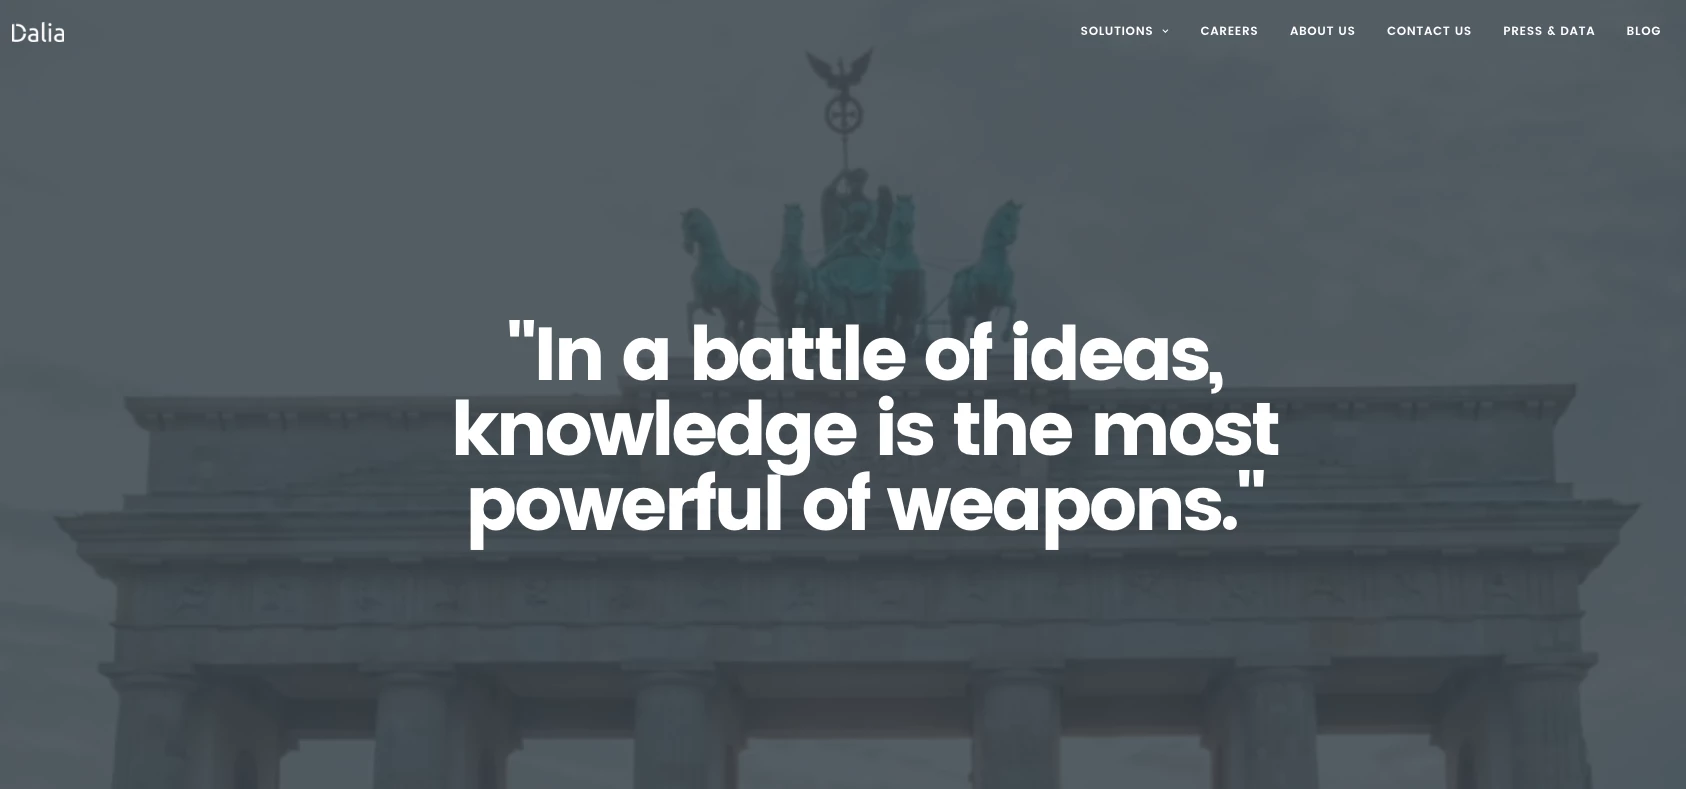 Berlin's Dalia has raised $7m in its Series A funding round.